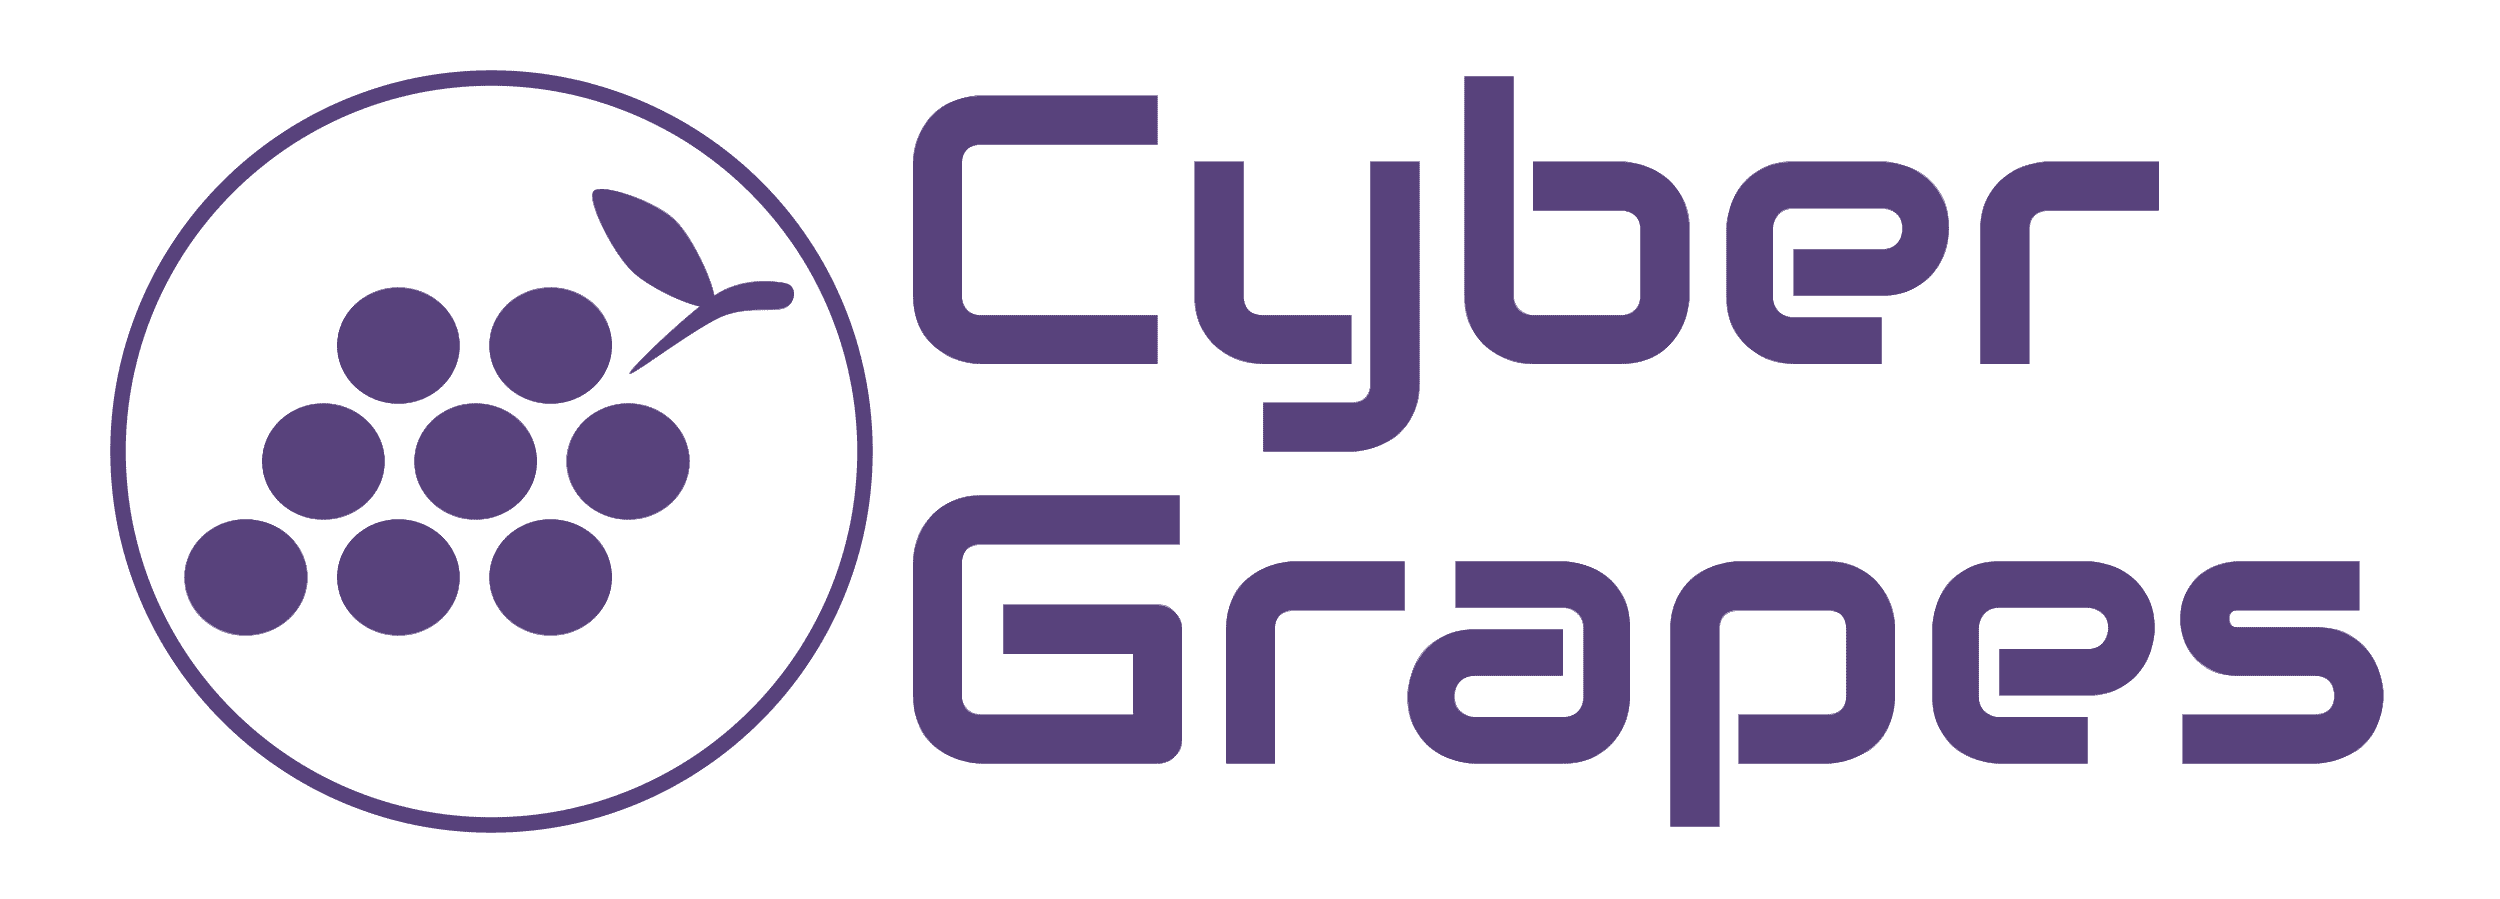 Cyber Grapes